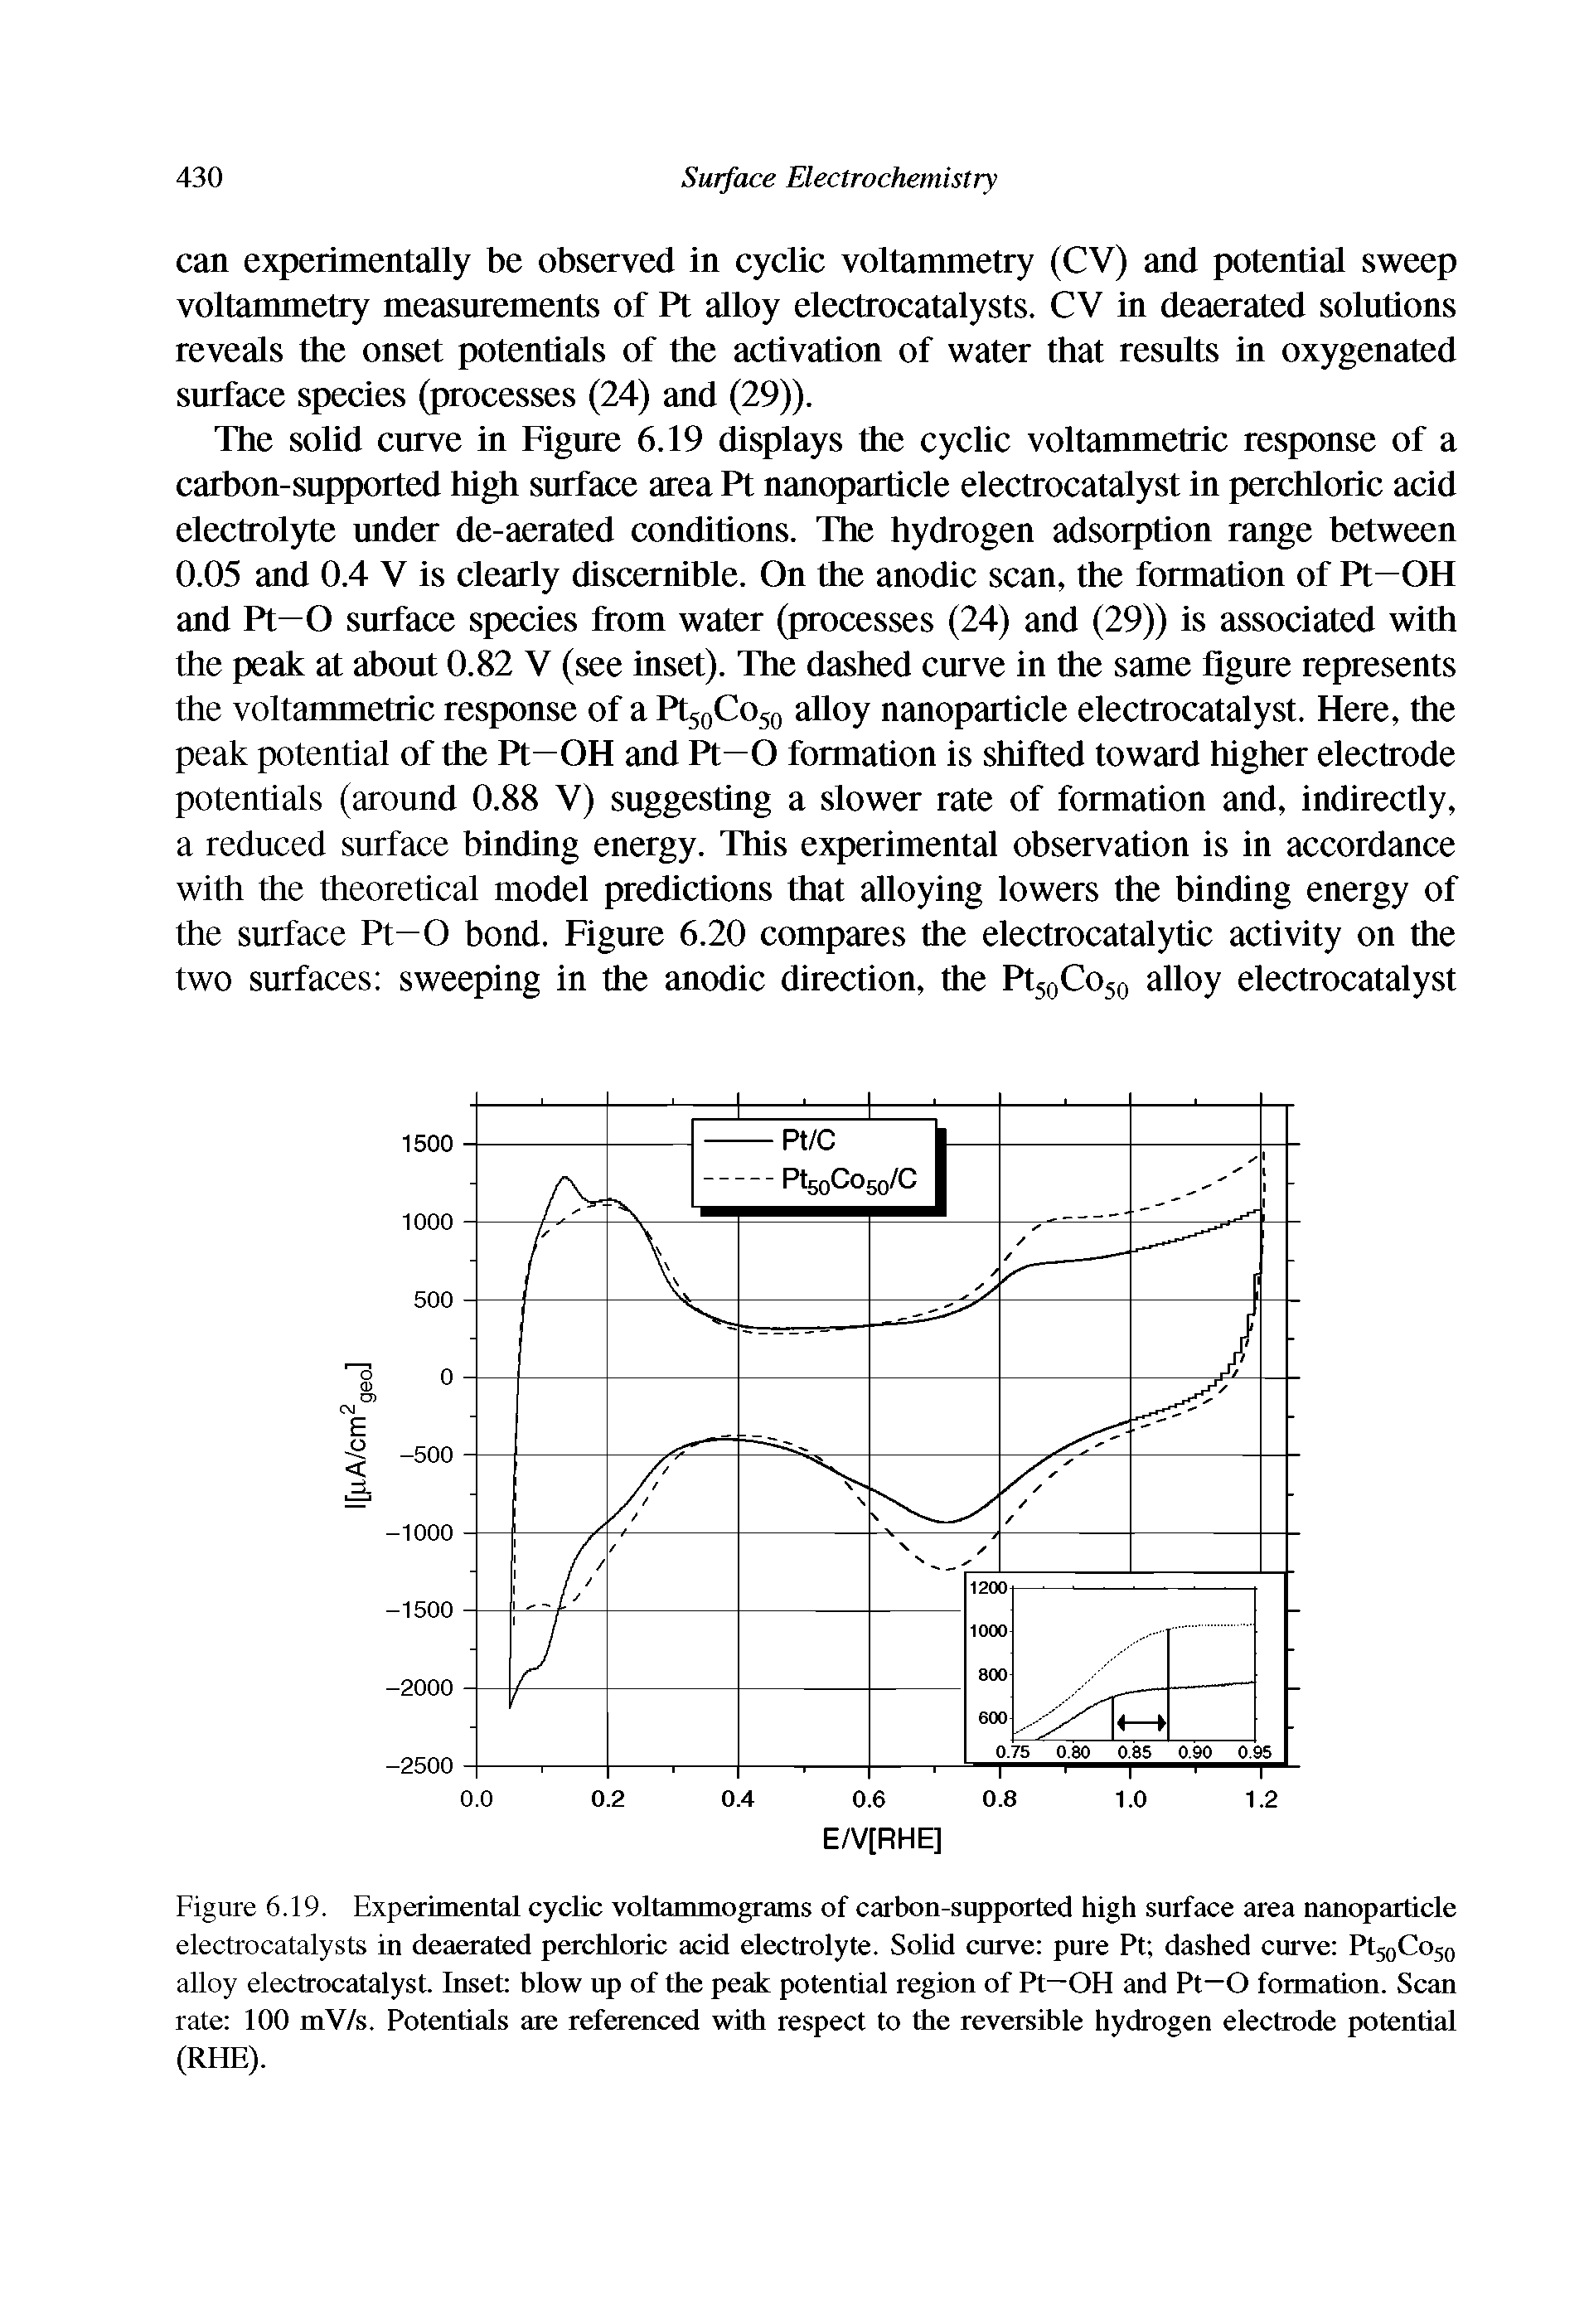 Figure 6.19. Experimental cyclic voltammograms of carbon-supported high surface area nanoparticle electrocatalysts in deaerated perchloric acid electrolyte. Solid curve pure Pt dashed curve Pt5oCo5o alloy electrocatalyst. Inset blow up of the peak potential region of Pt—OH and Pt— formation. Scan rate 100 mV/s. Potentials are referenced with respect to the reversible hydrogen electrode potential (RHE).